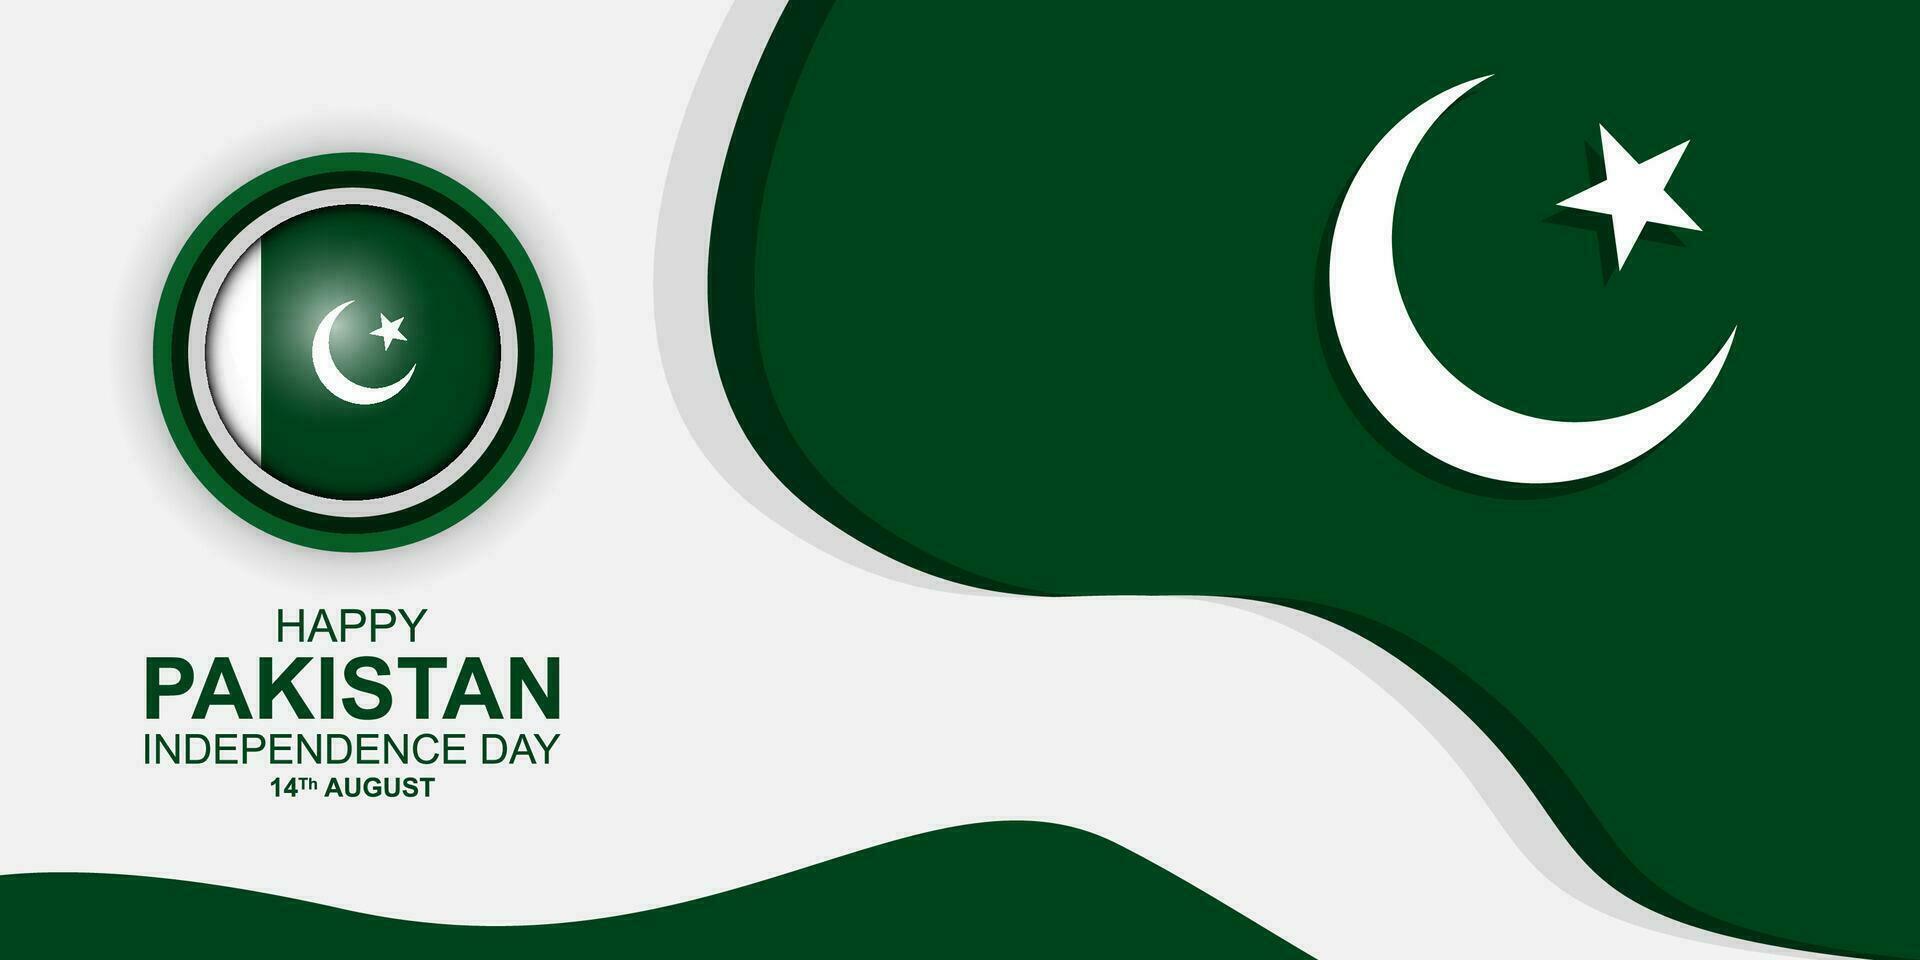 Pakistan independence day. Pakistan's Independence Day is celebrated every year on 14th August. Greeting poster banner design. Vector illustration